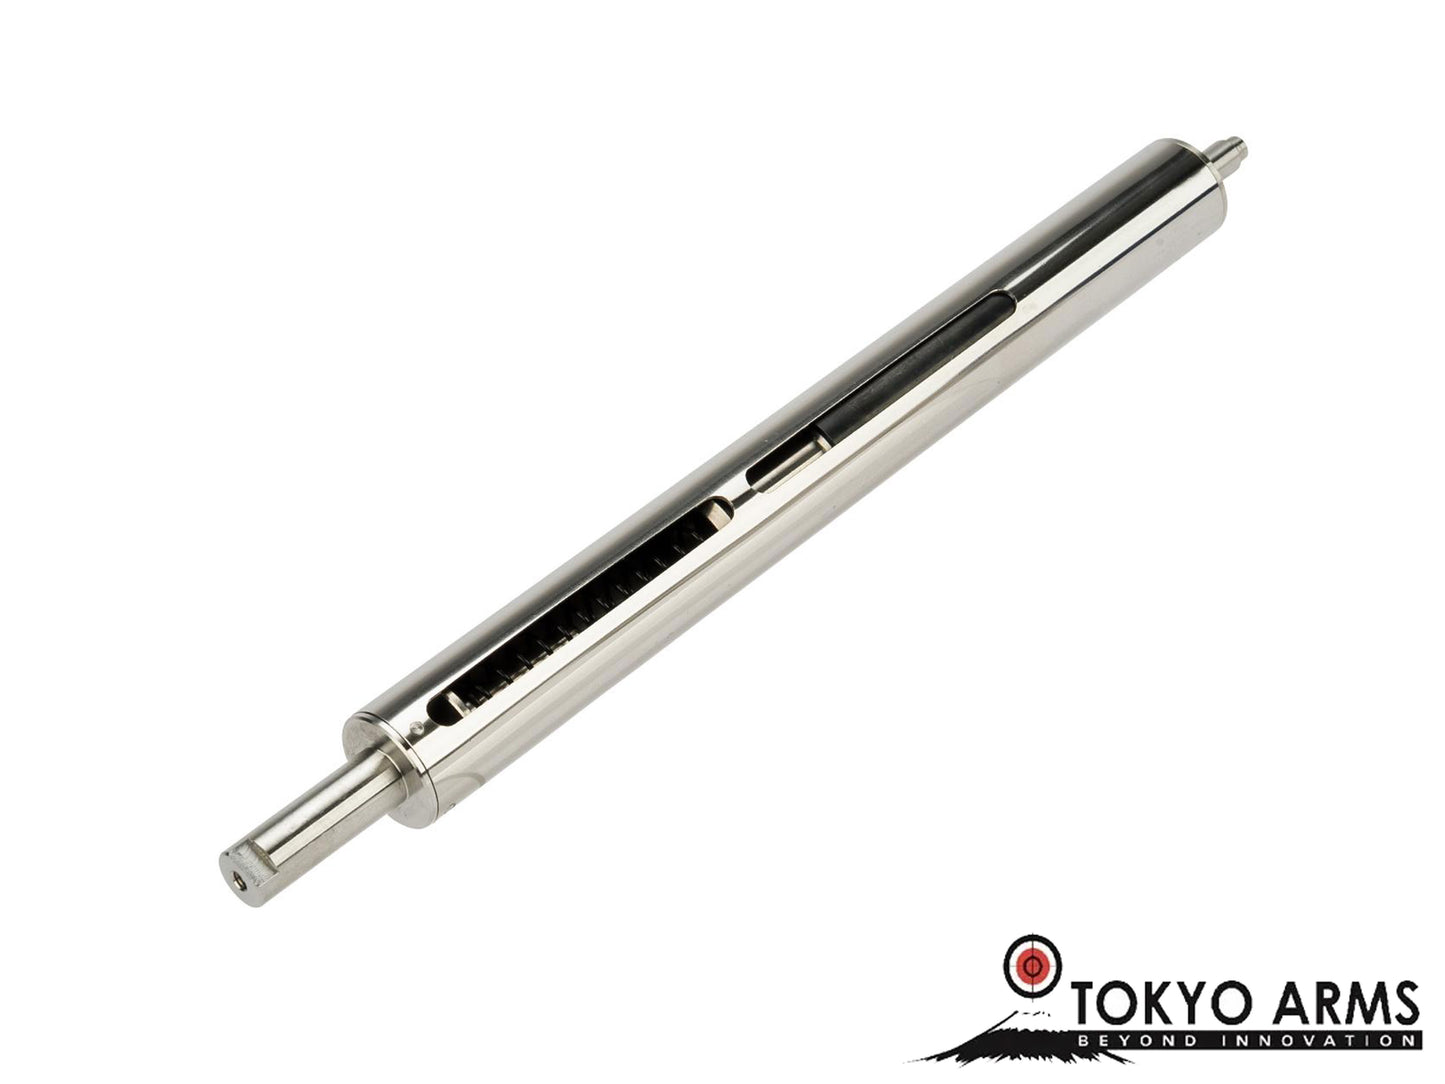 Tokyo Arms Stainless Steel CO2 Conversion Kit for Tokyo Marui / WELL VSR-10 Airsoft Sniper Rifles.